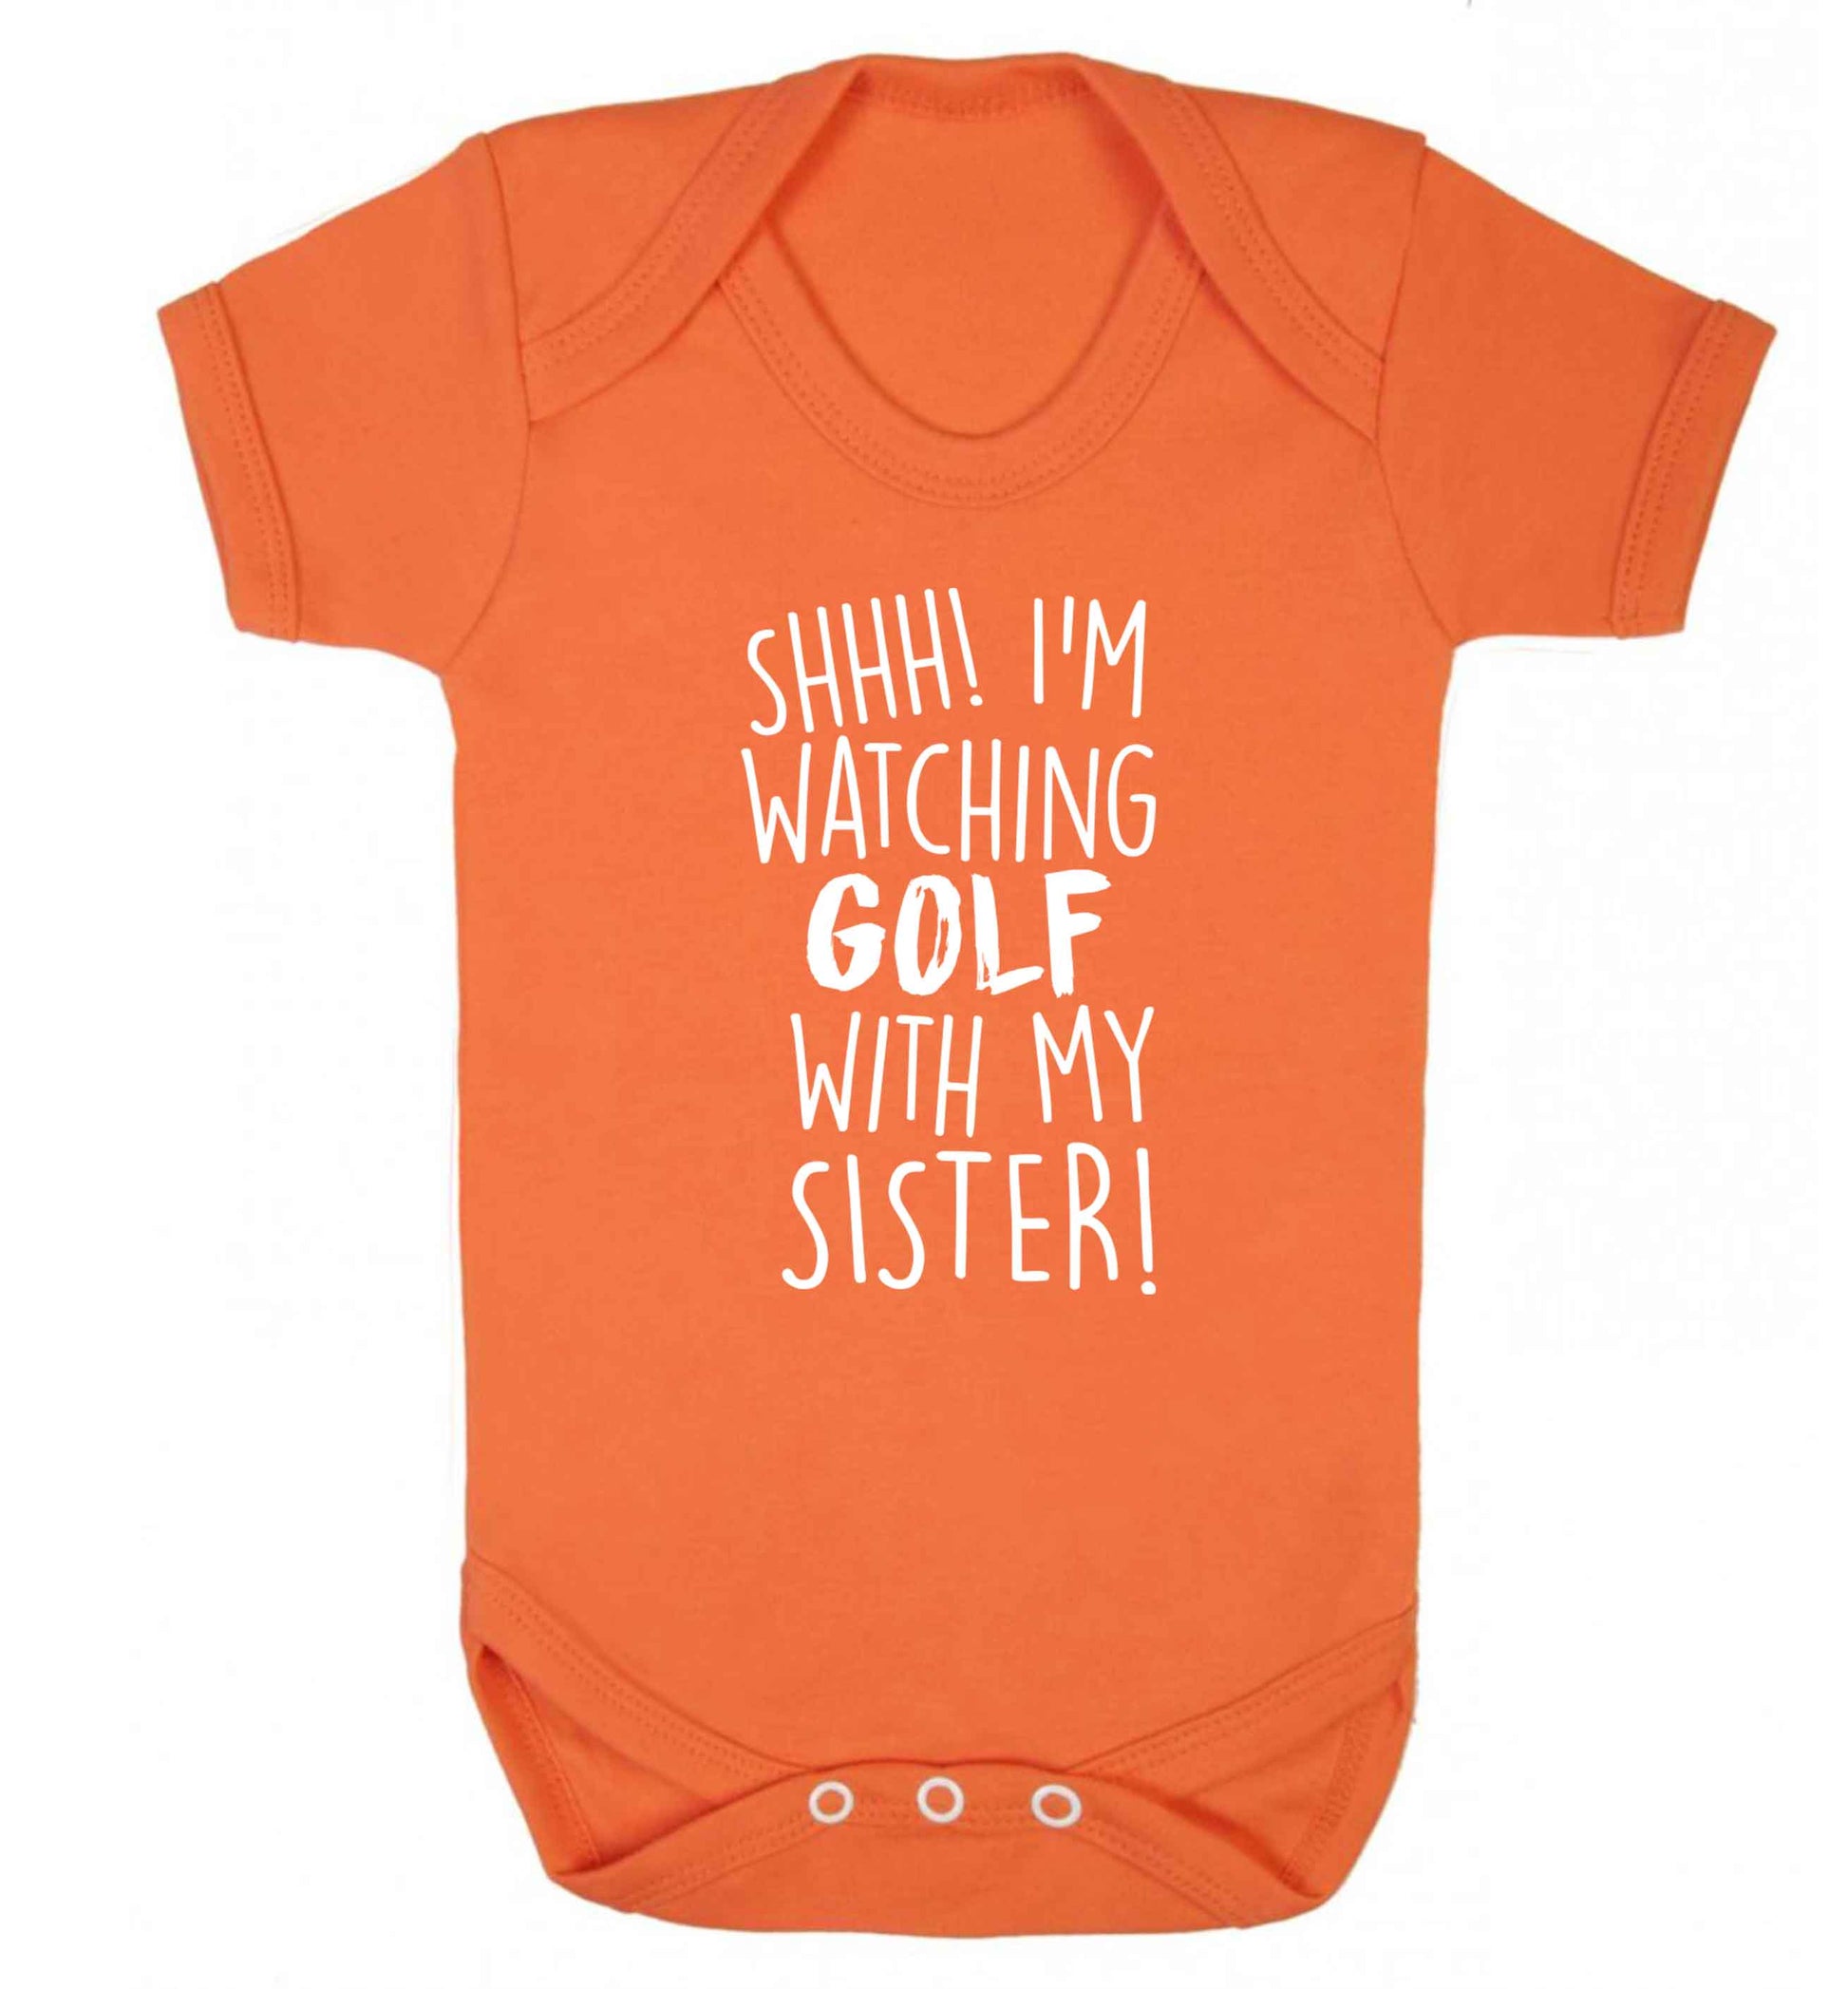 Shh I'm watching golf with my sister Baby Vest orange 18-24 months